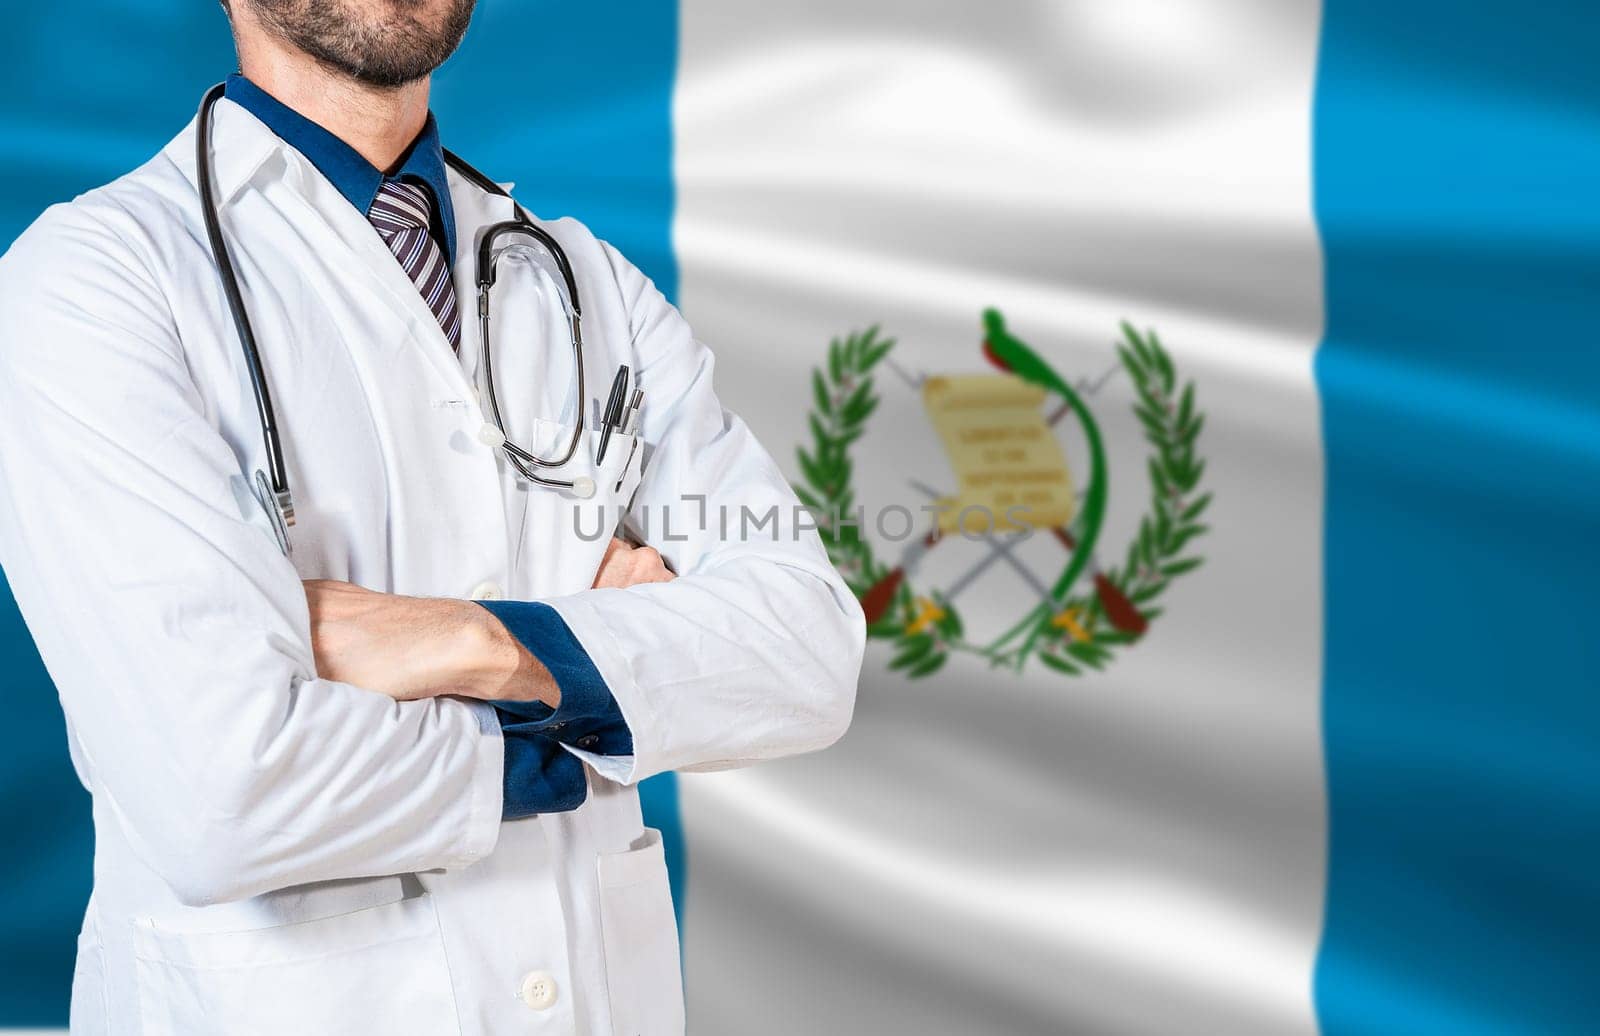 Health and care with the flag of Guatemala. Doctor with stethoscope on guatemala flag. Guatemala national health concept, Doctor arm with stethoscope on Guatemala flag